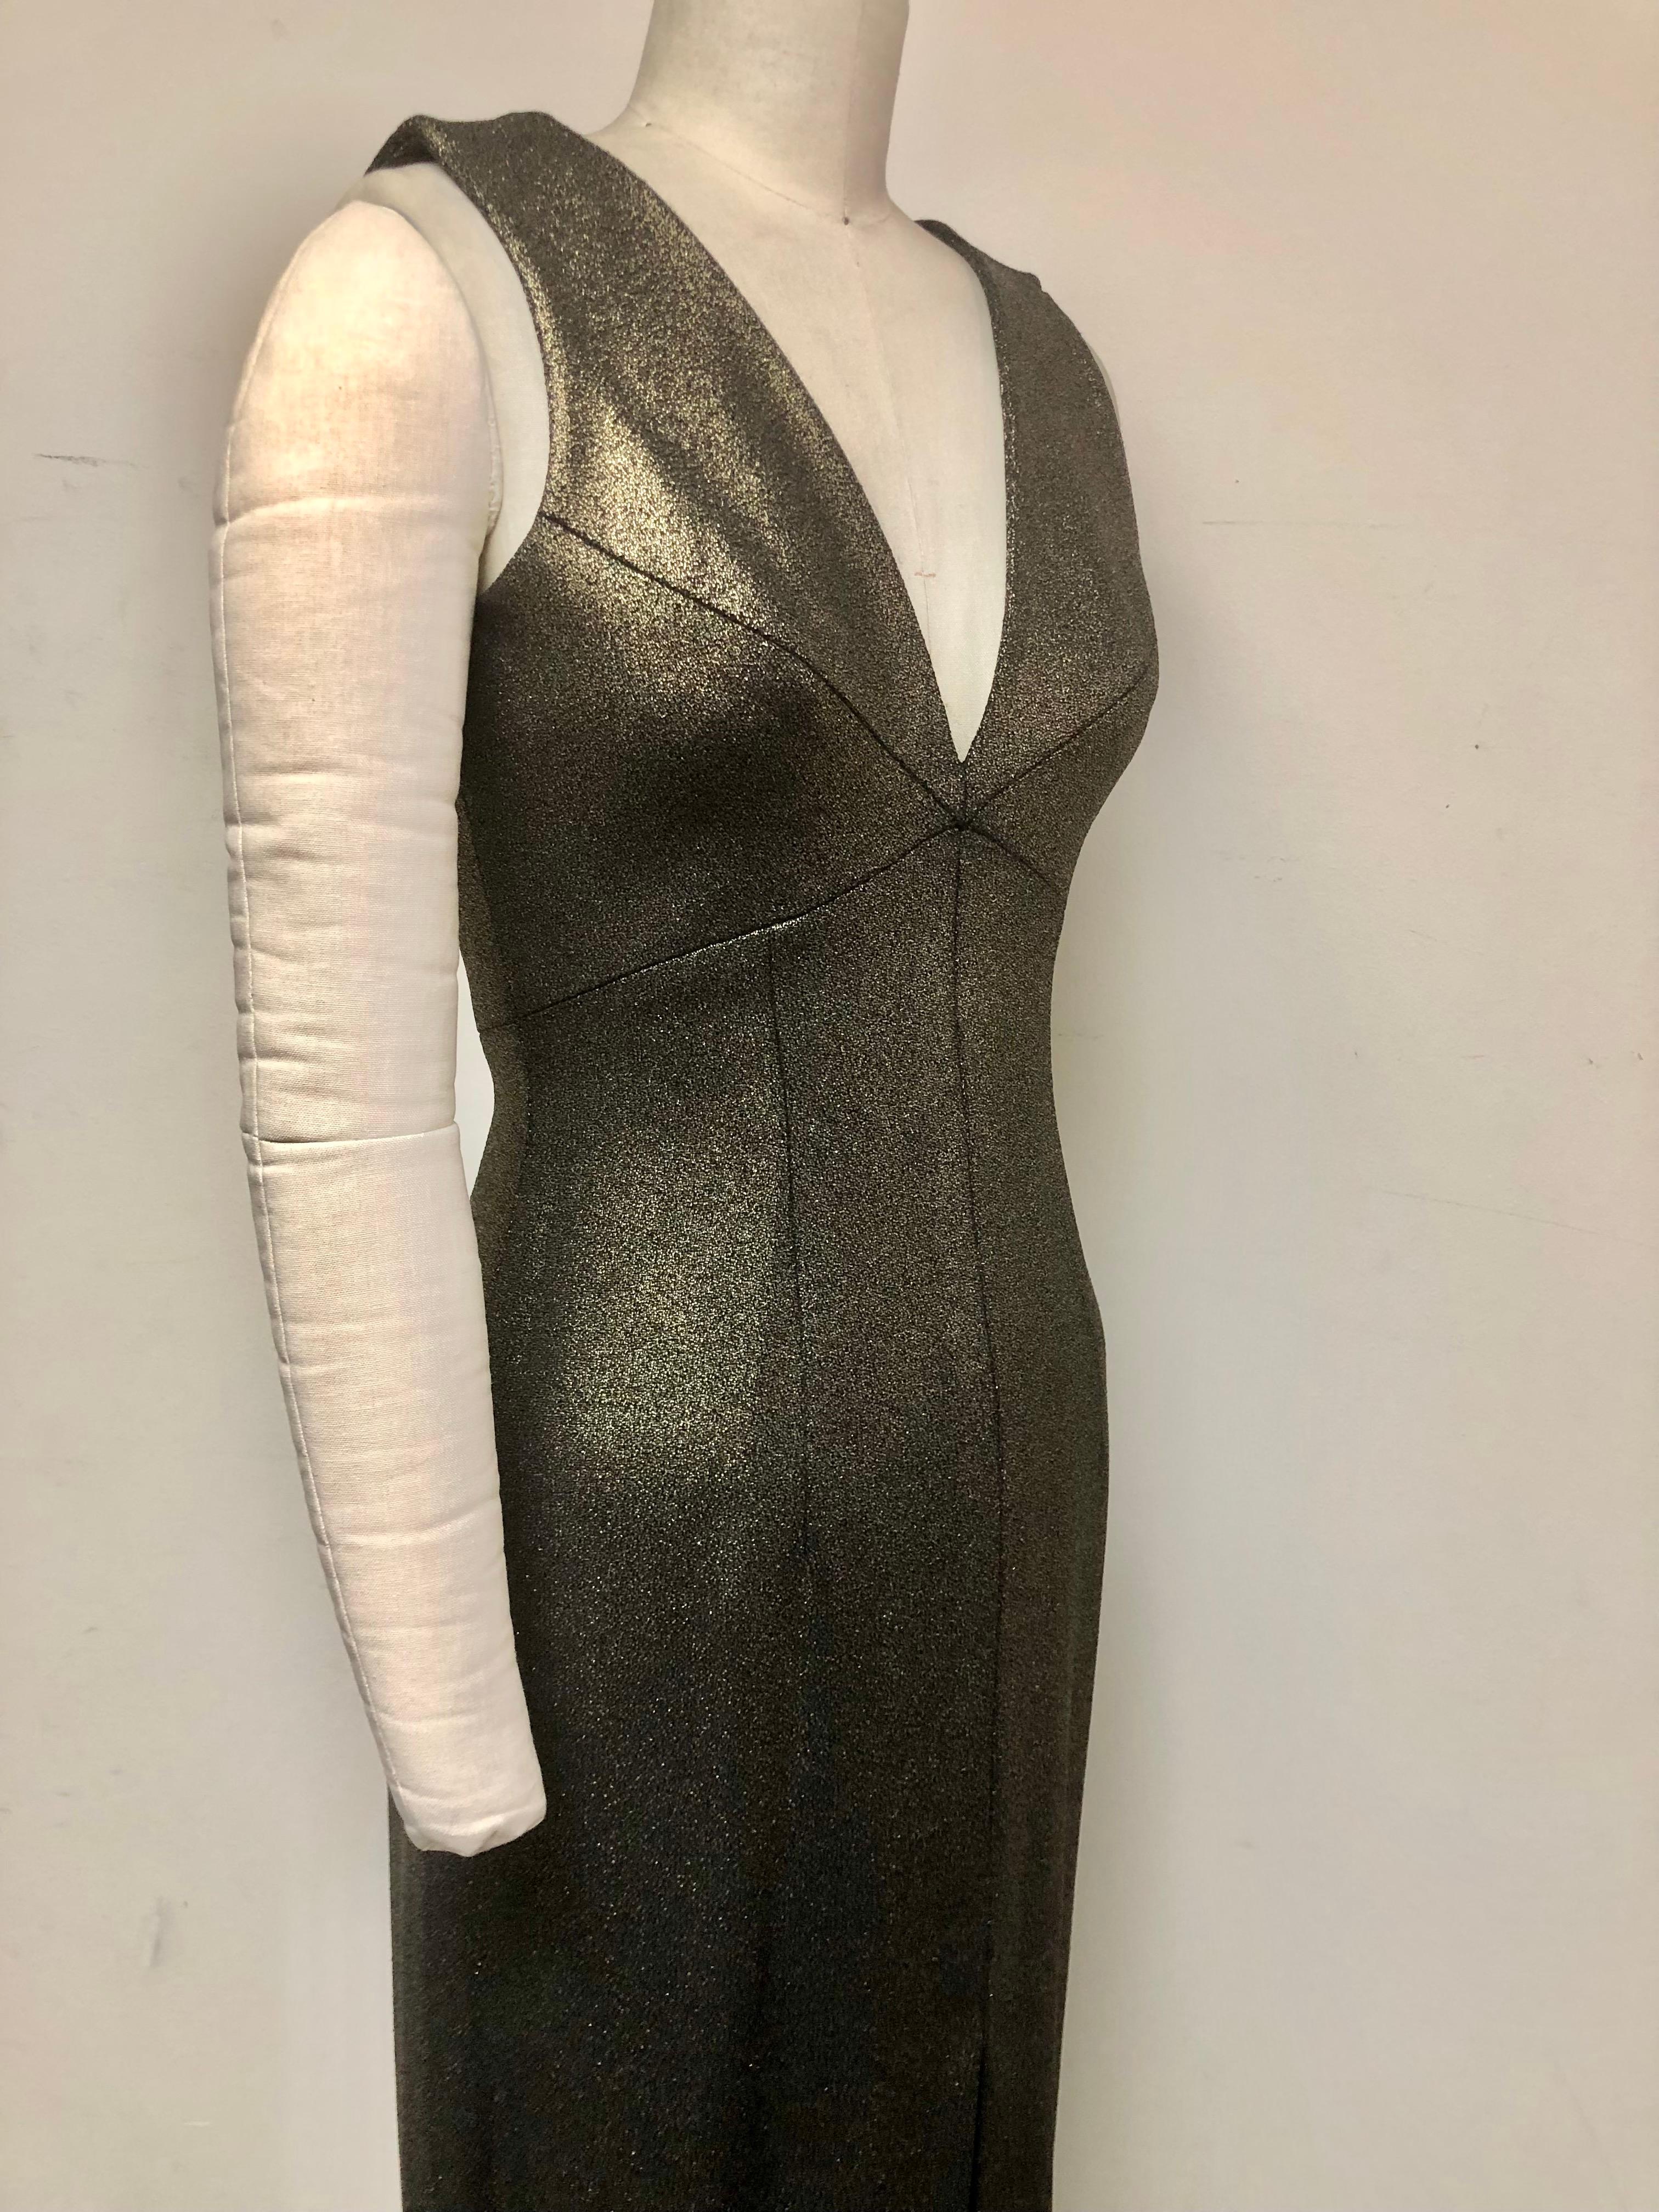  Plunging V Neck Body Dress in Luxurious Taroni Gold Lame For Sale 4